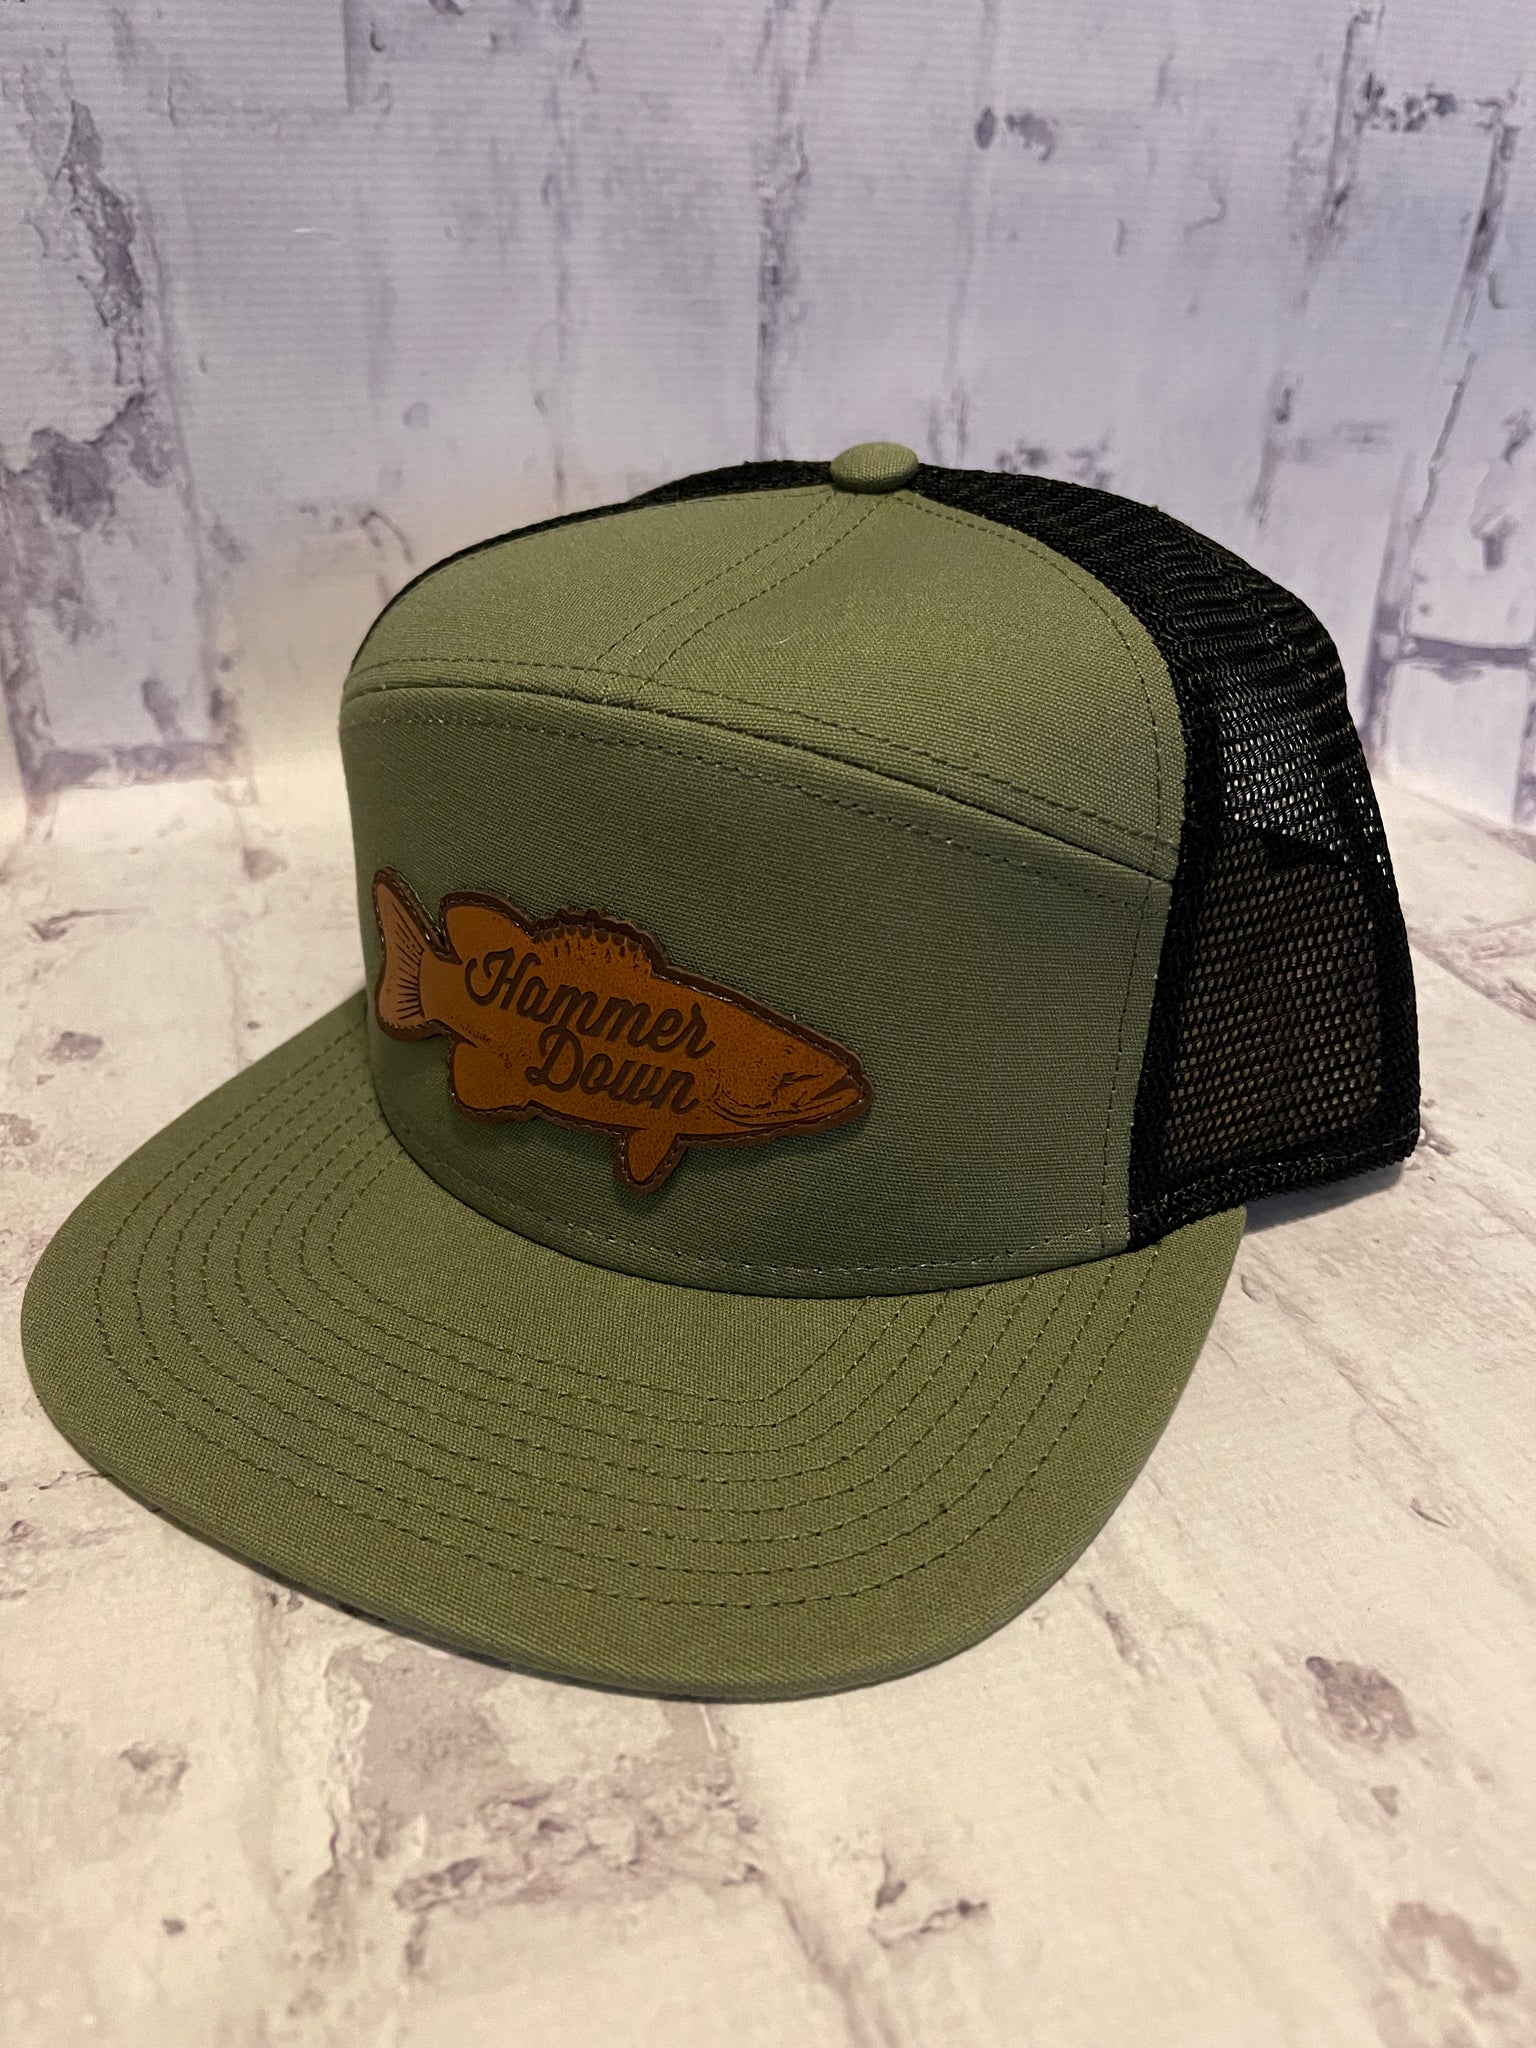 Hammer Down "Bass Script" Trucker Hat - Olive with Leather Patch - Southern Charm "Shop The Charm"